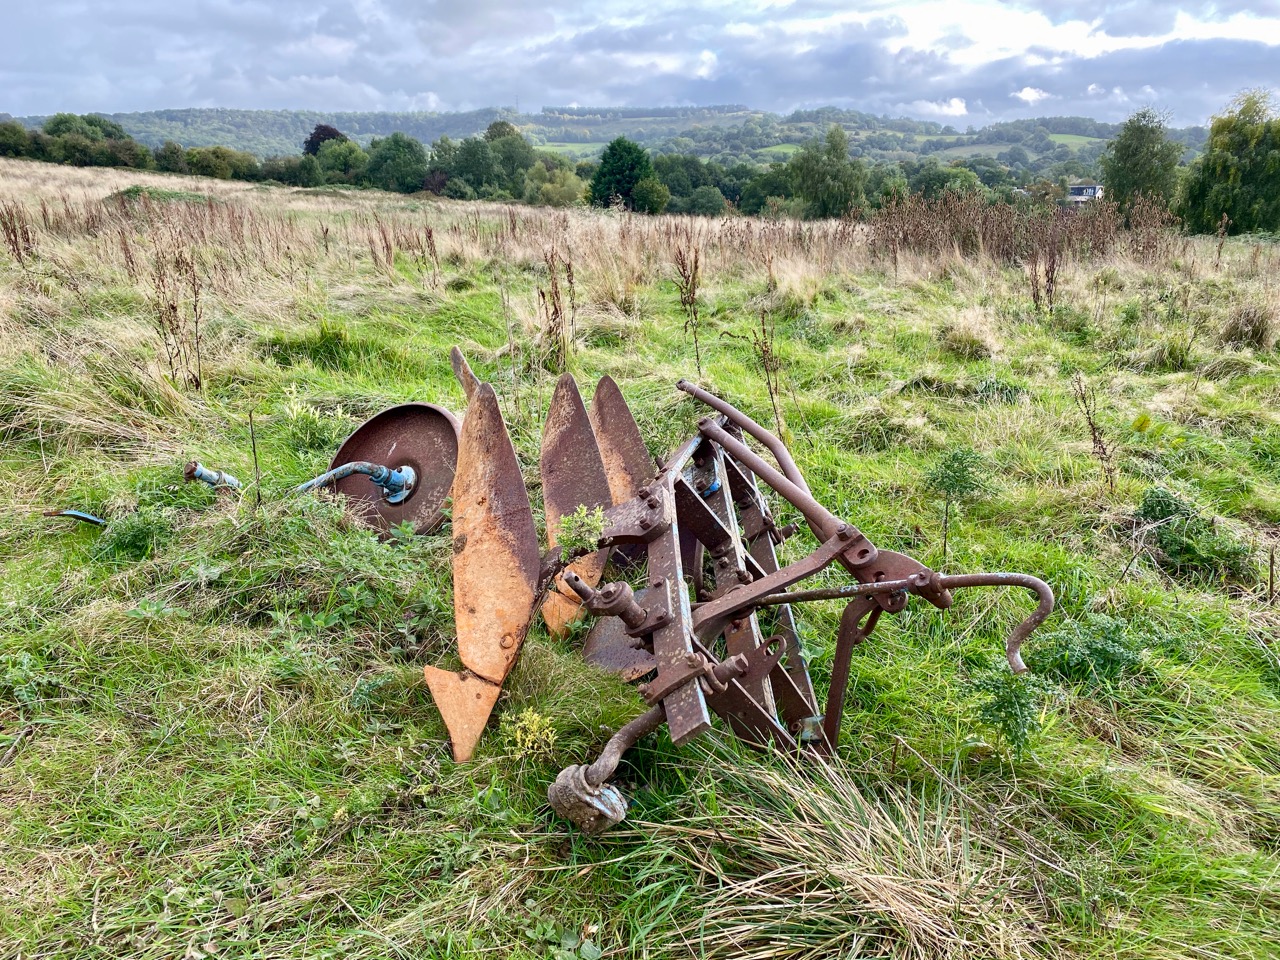 Rusty abandoned farm equipment in a field with a backdrop of hills